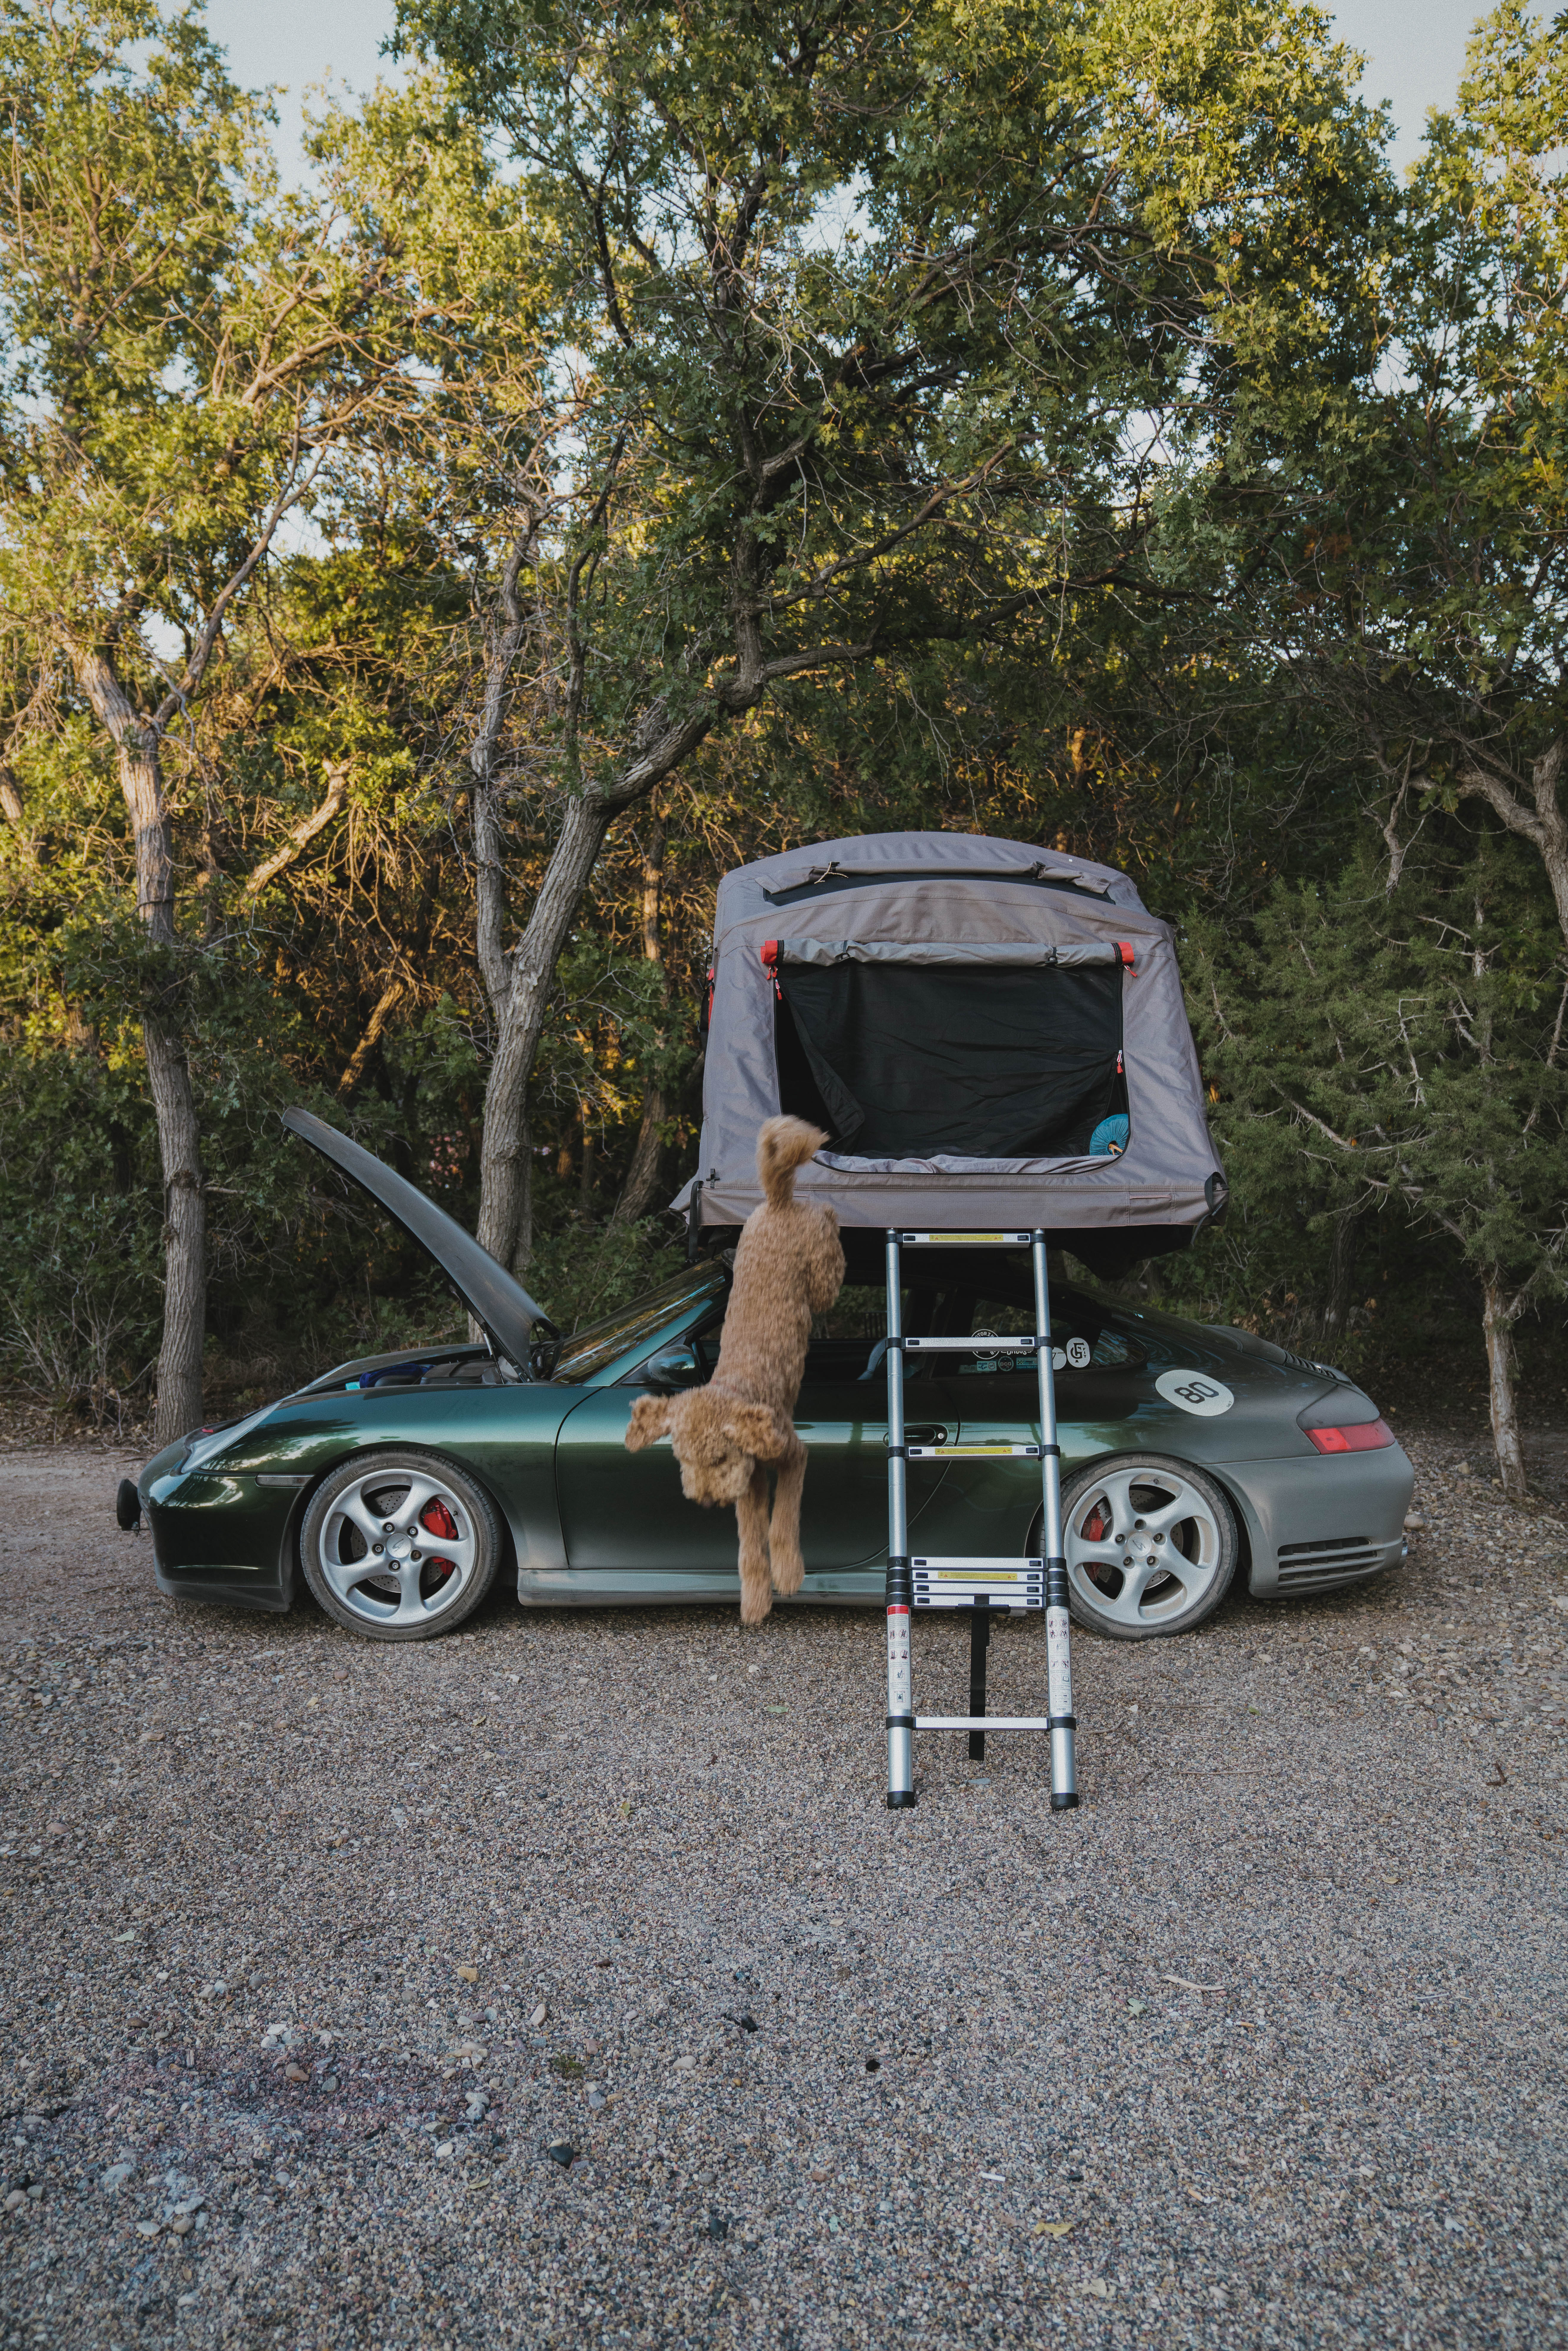 Goldendoodle mid-jump from rooftop tent on Porsche 911